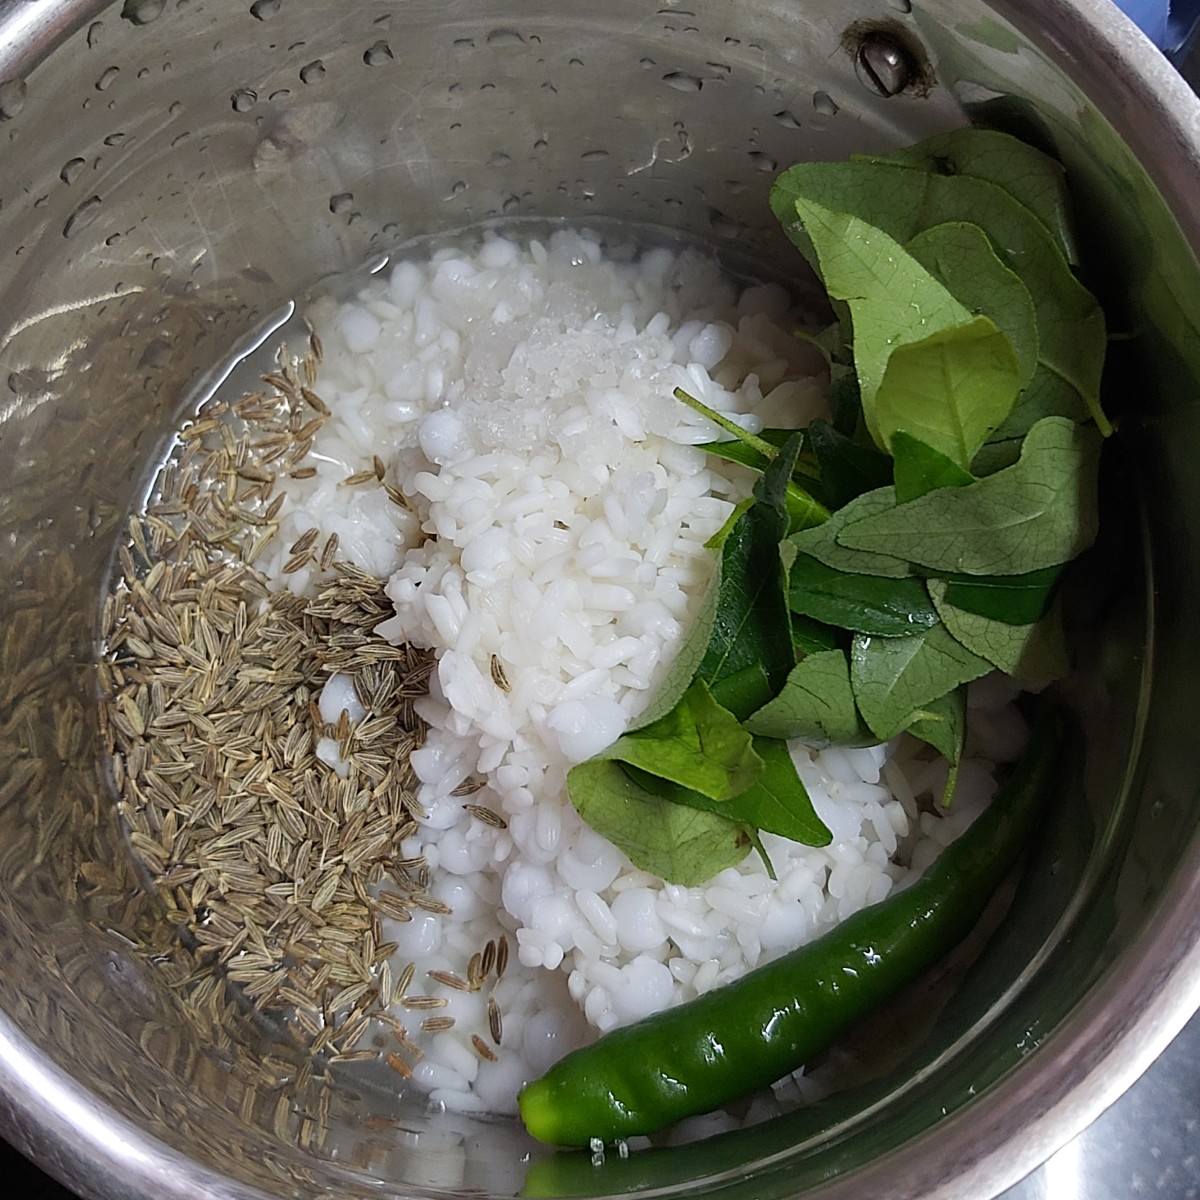 Add 1 teaspoon of cumin seeds, 1-2 strings of fresh curry leaves, 1-2 green chilies and salt to taste.